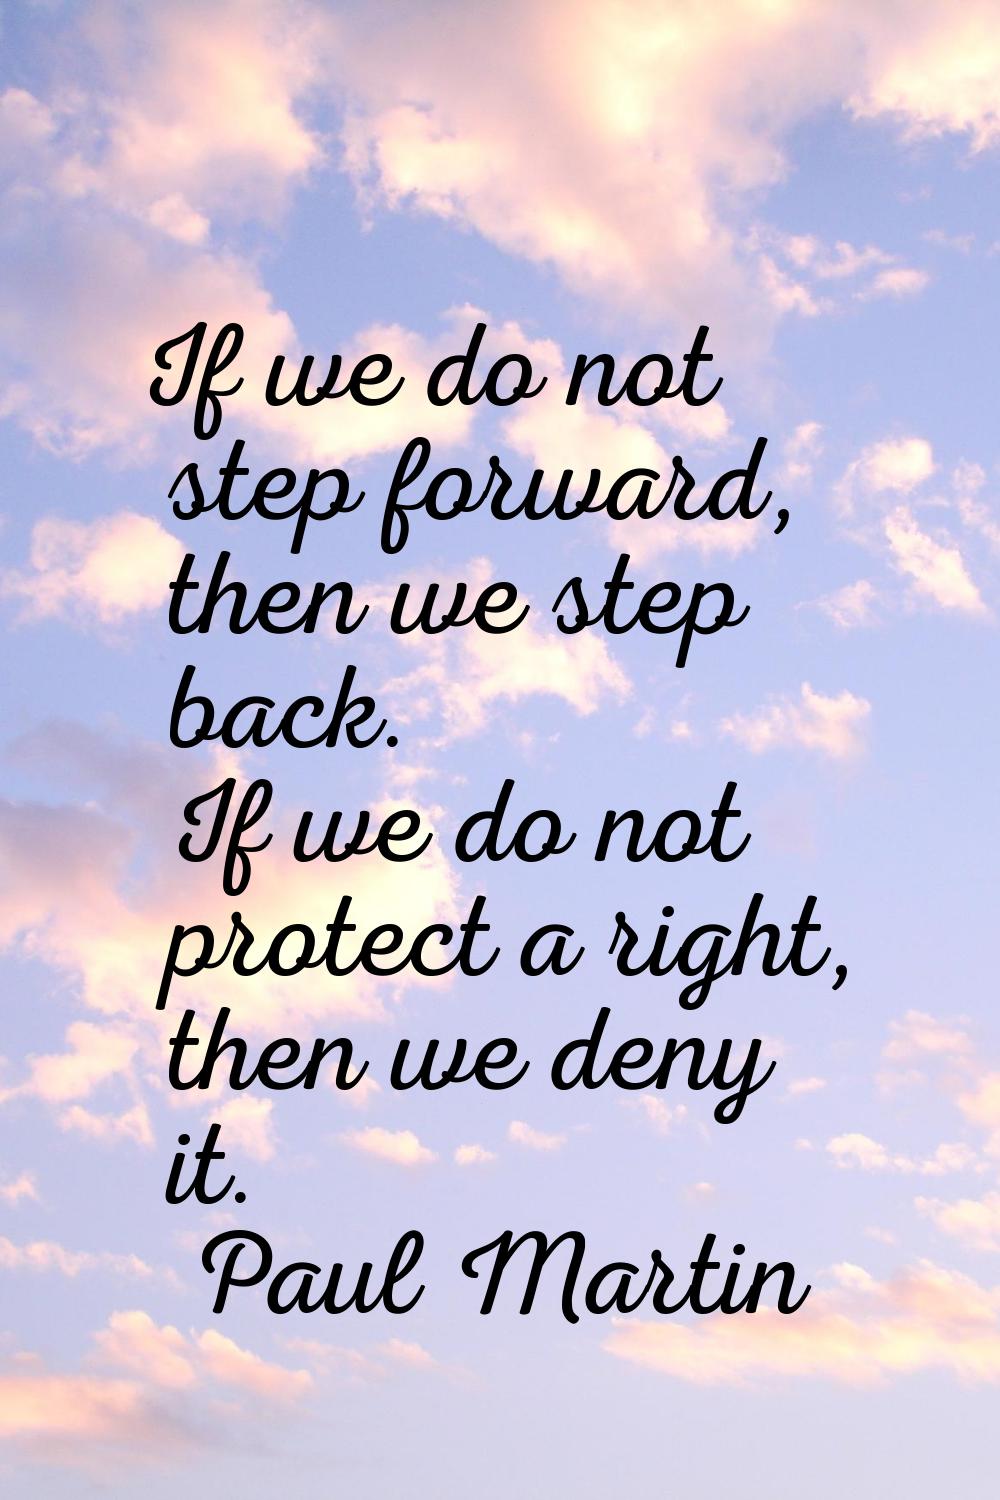 If we do not step forward, then we step back. If we do not protect a right, then we deny it.